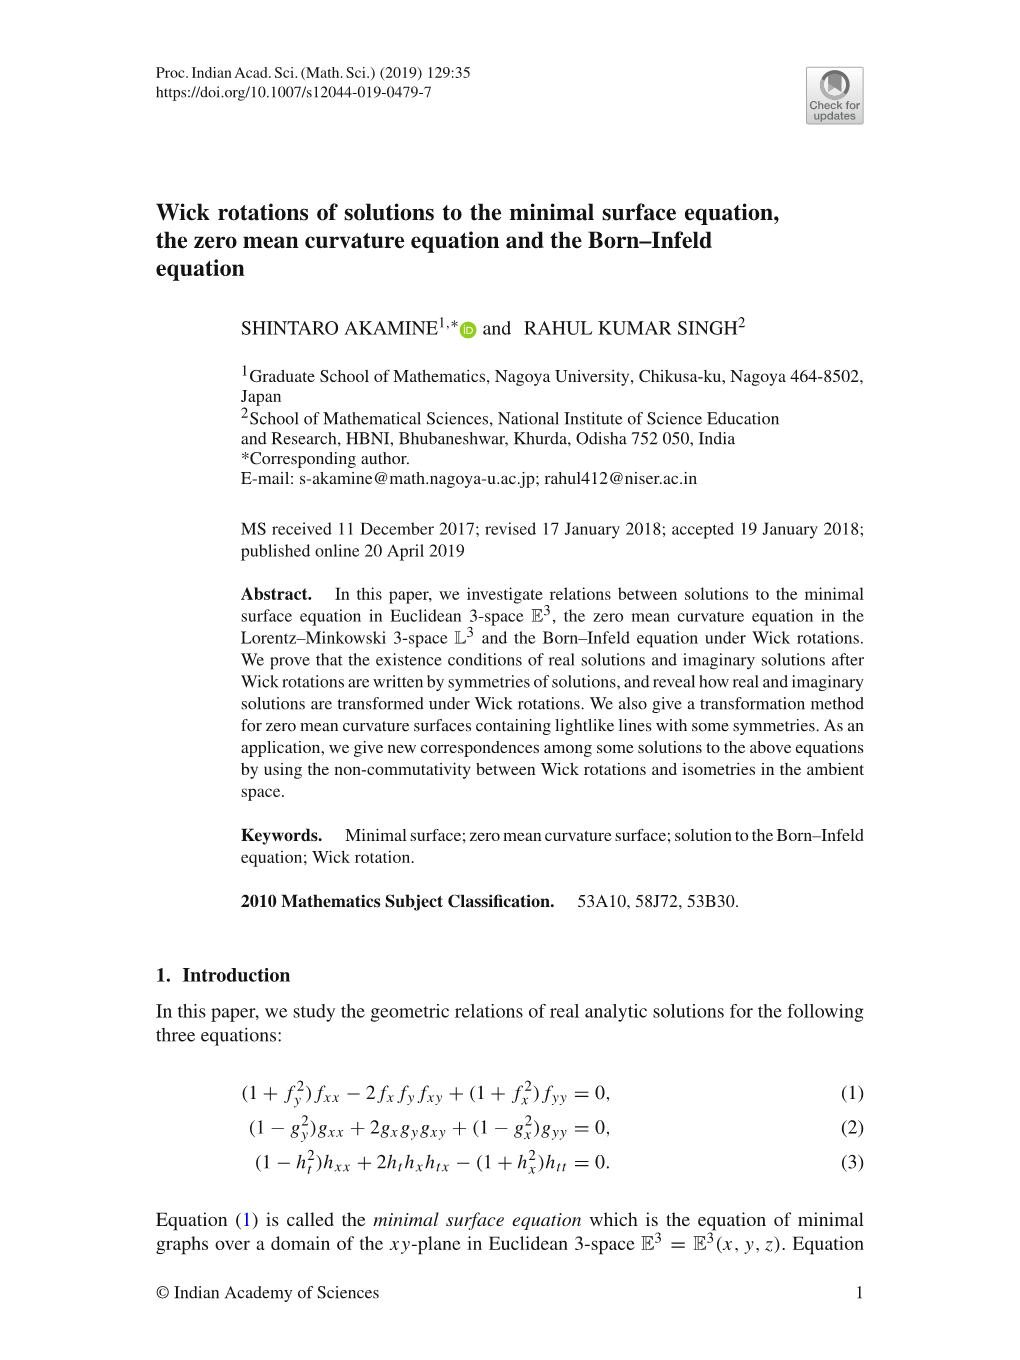 Wick Rotations of Solutions to the Minimal Surface Equation, the Zero Mean Curvature Equation and the Born–Infeld Equation